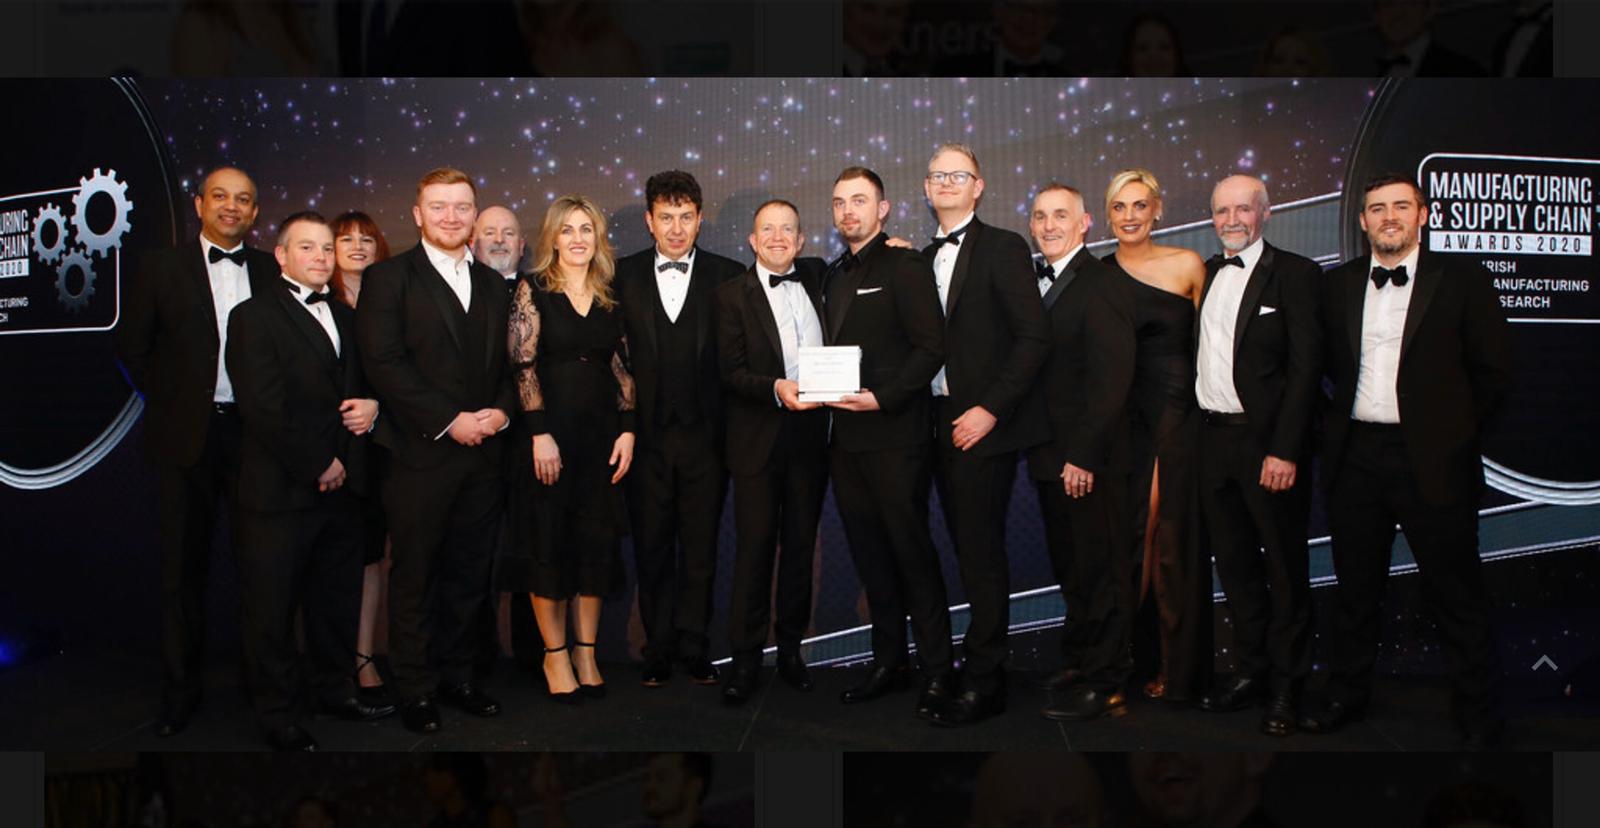 The ITS and Boston Scientific teams - winners of the Best Use of Robotics at the IMR Manufacturing Awards 2020